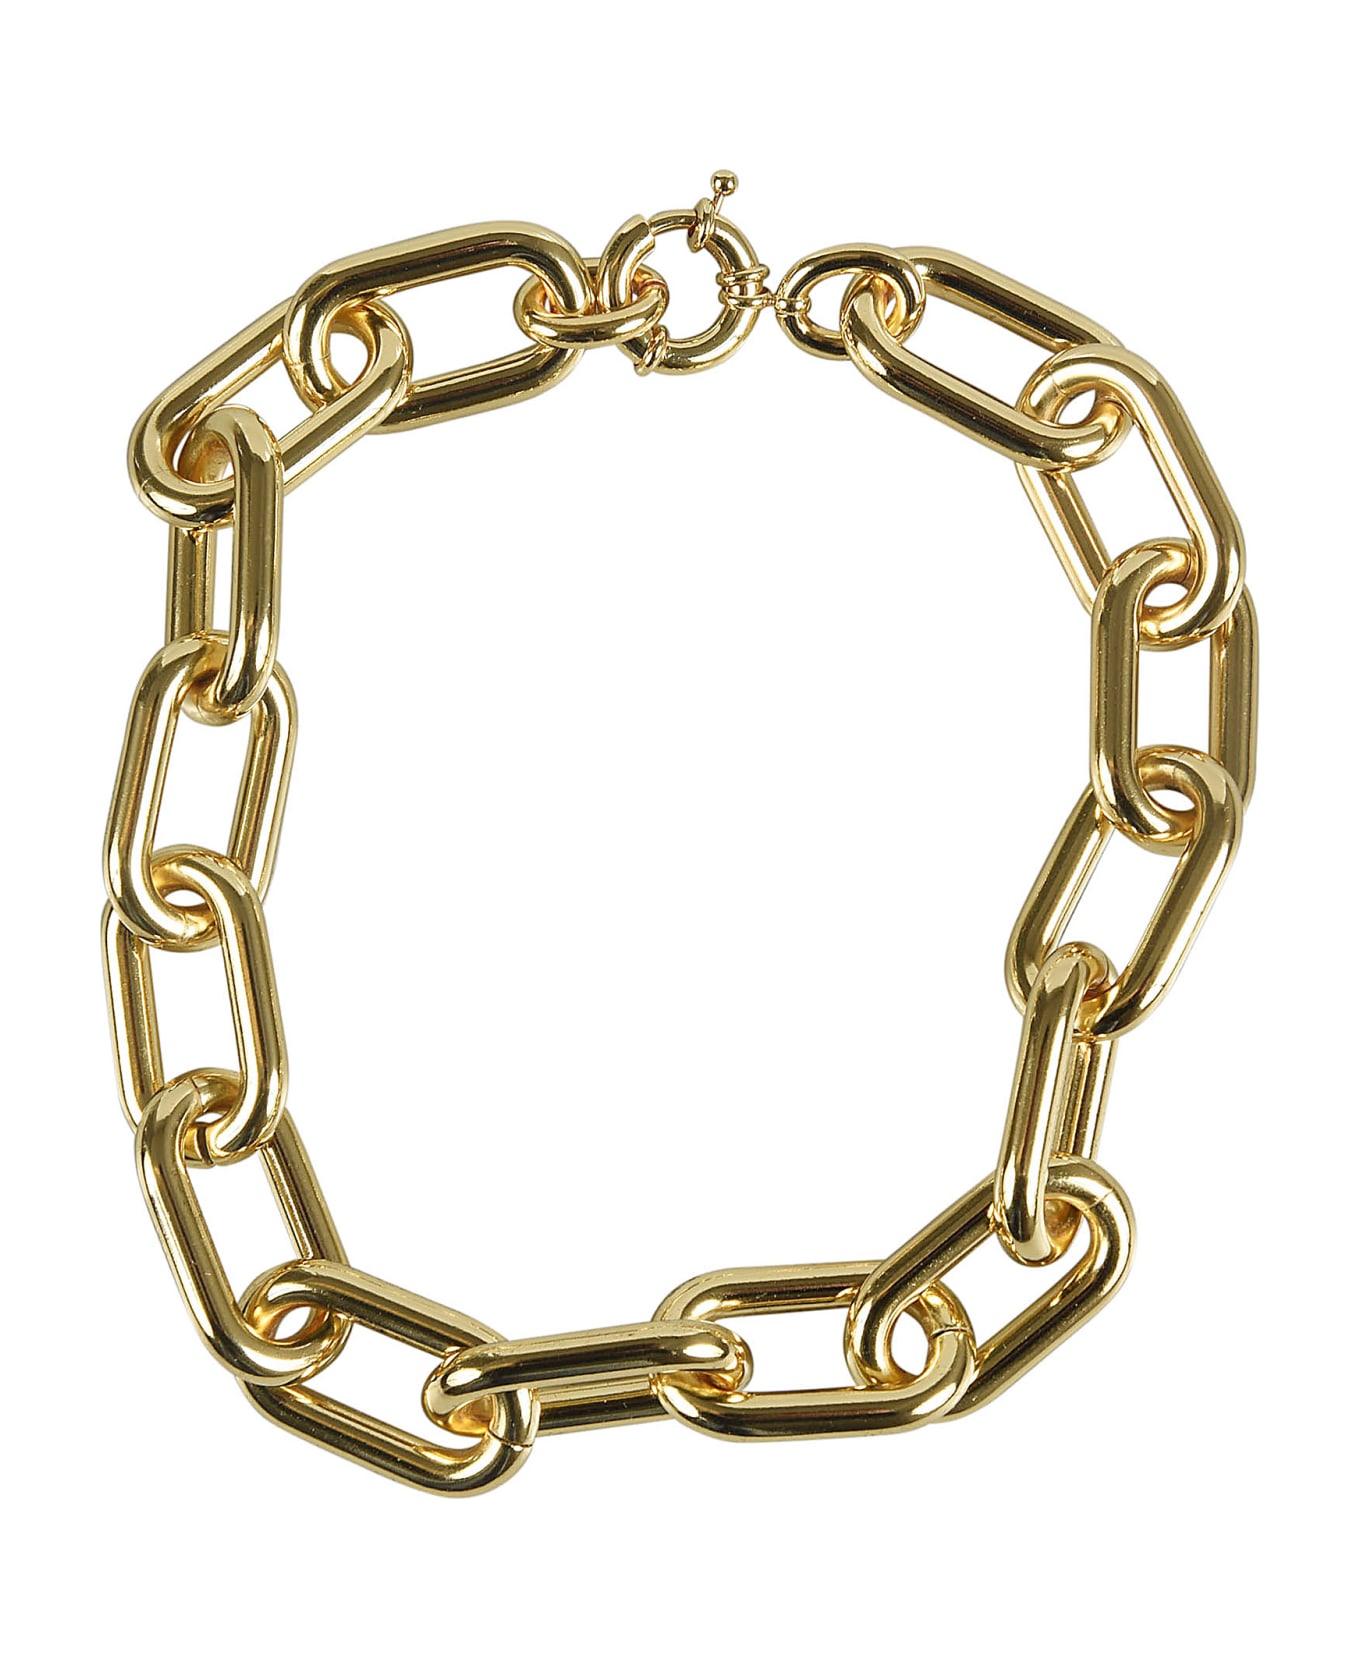 Federica Tosi 'norah' Gold-plated Chain Necklace Woman Federica Tosi - Golden ネックレス